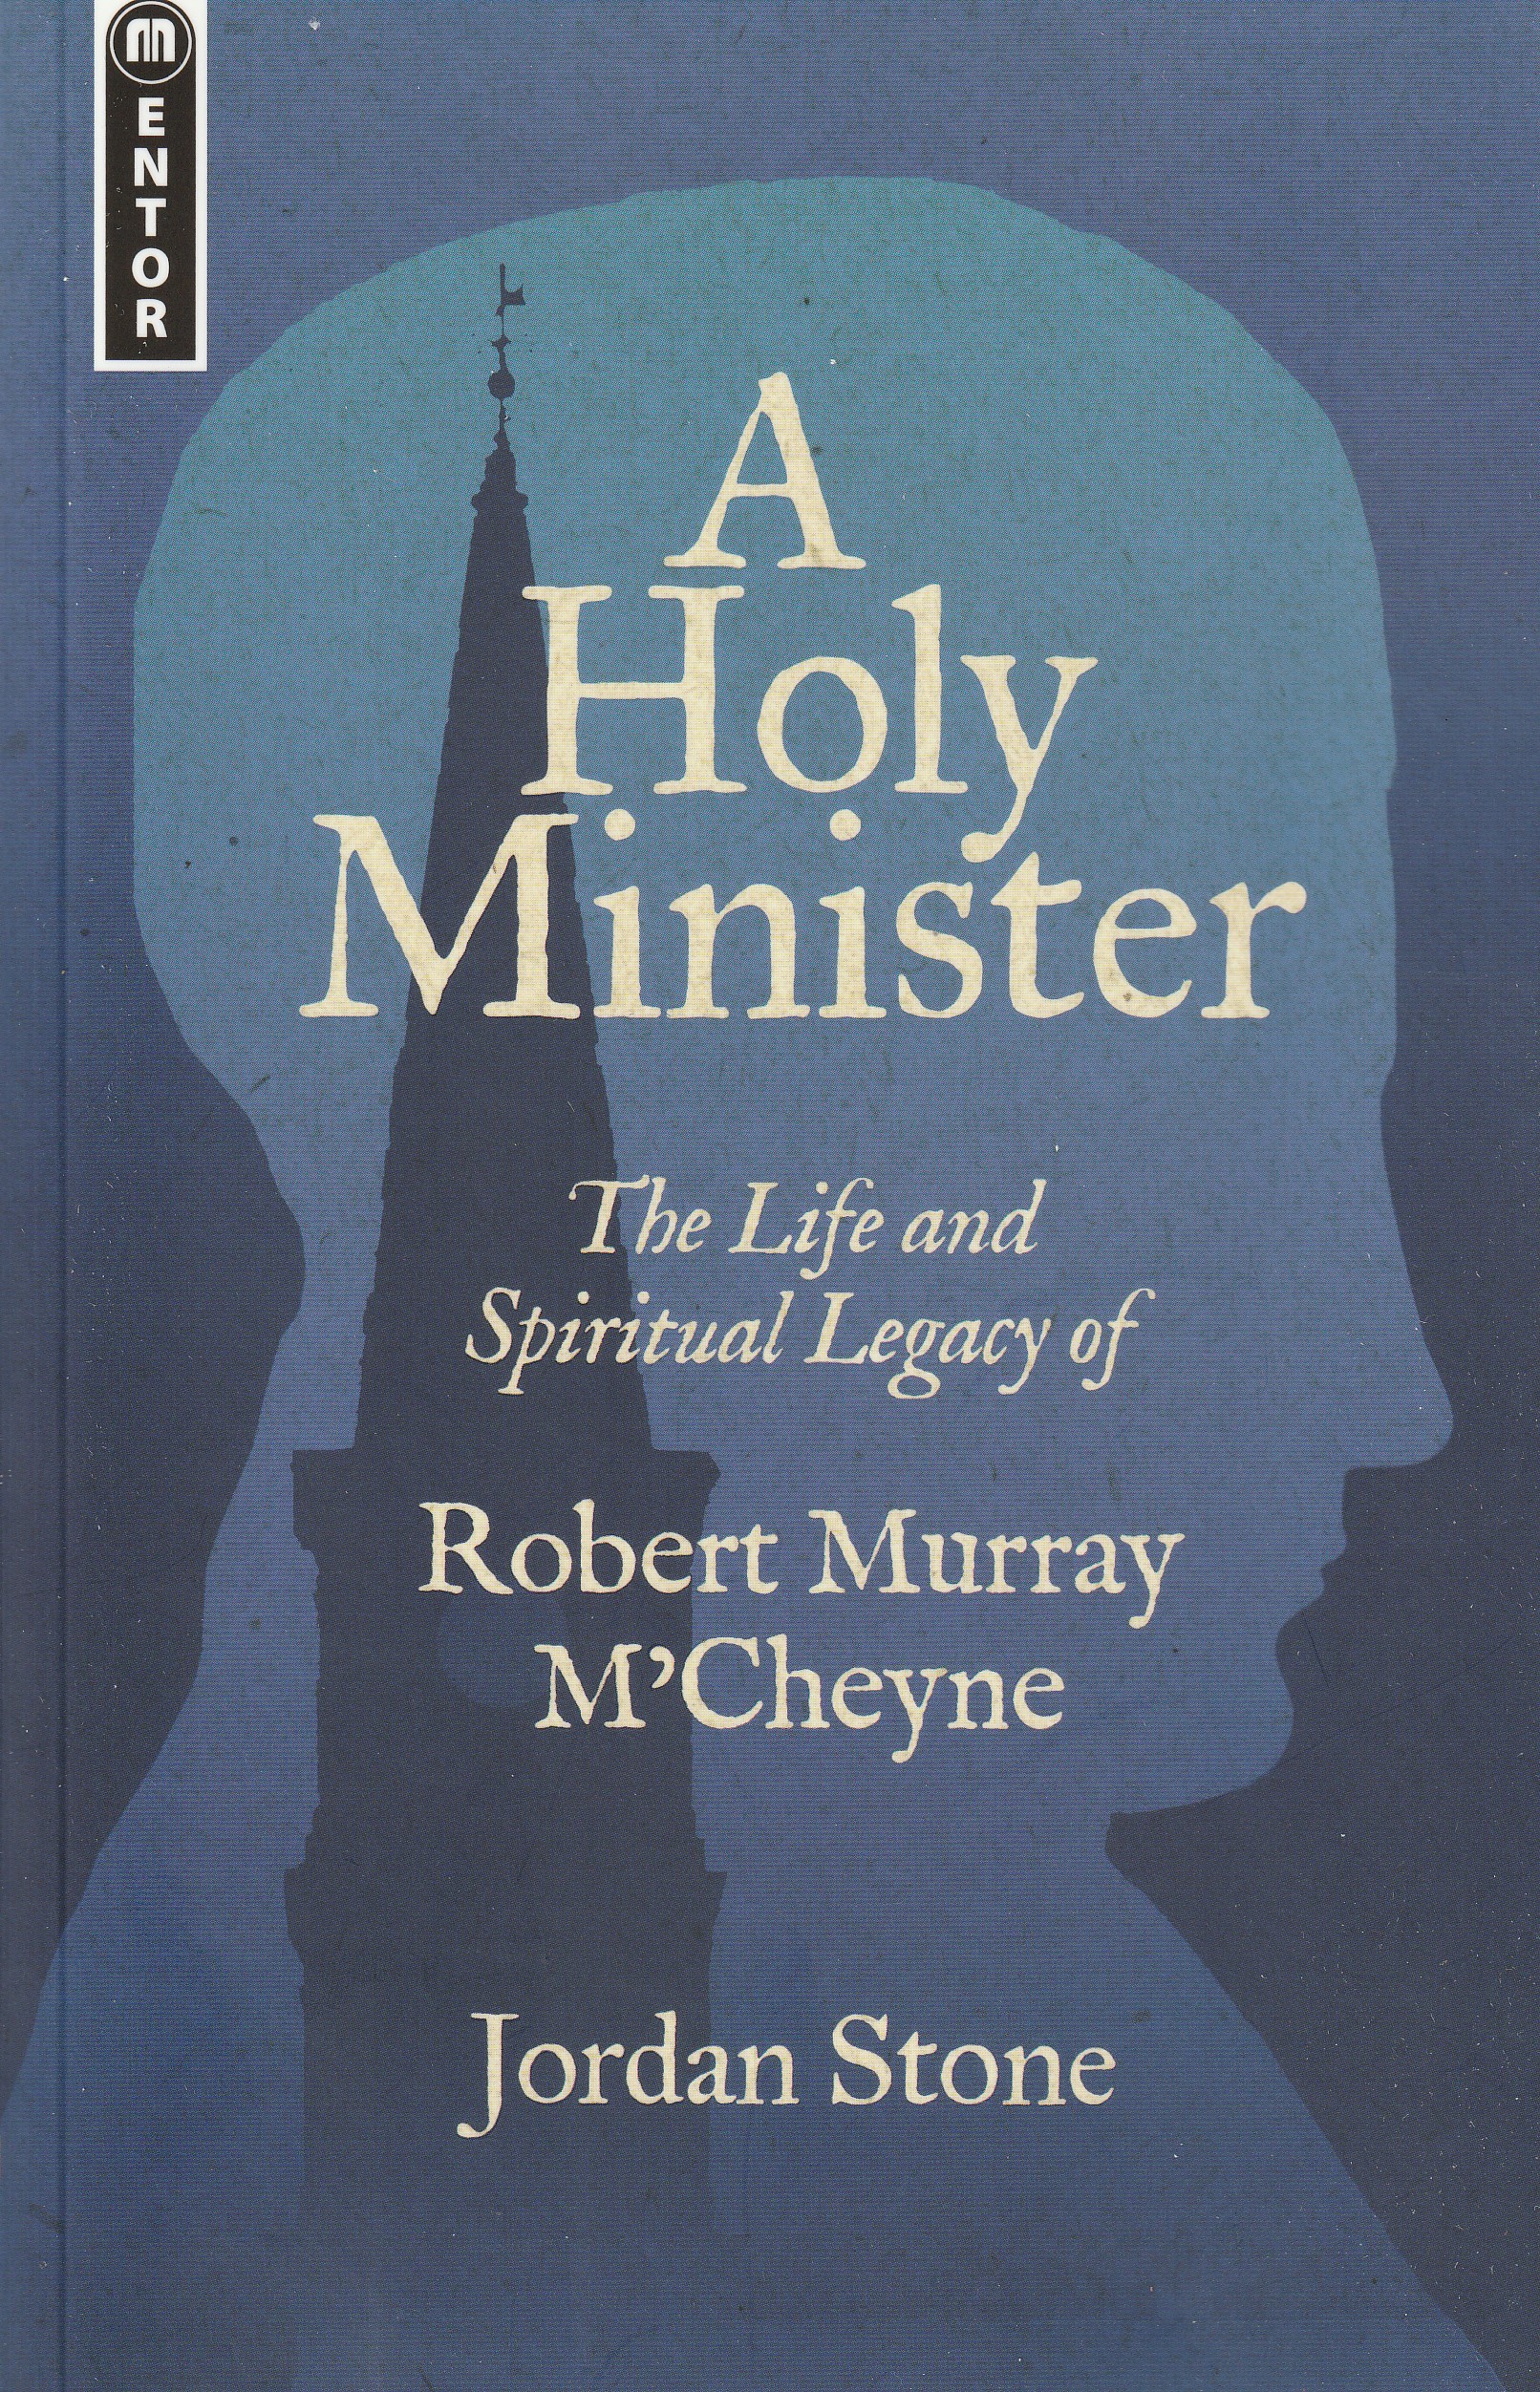 A Holy Minister: The Life and Spiritual Legacy of Robert Murray M'Cheyne